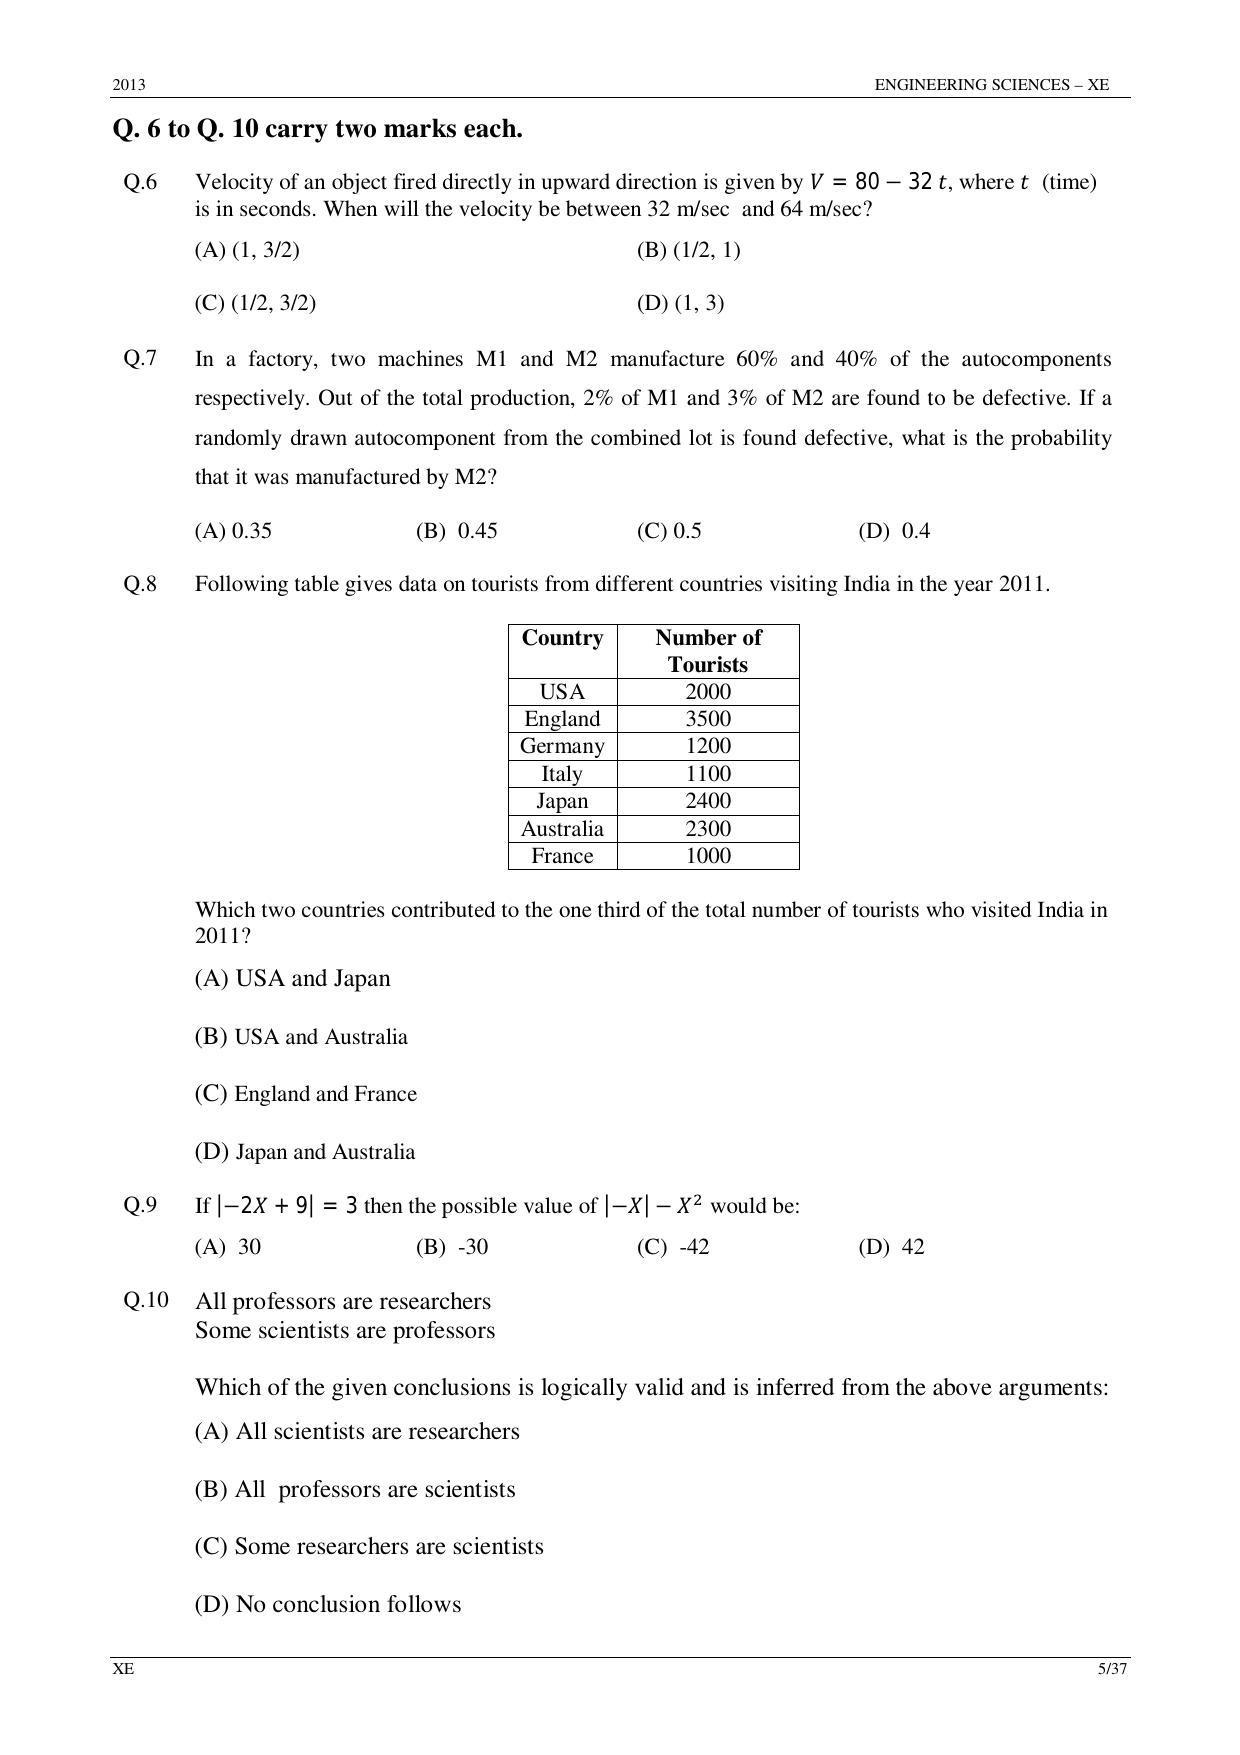 GATE 2013 Engineering Sciences (XE) Question Paper with Answer Key - Page 5